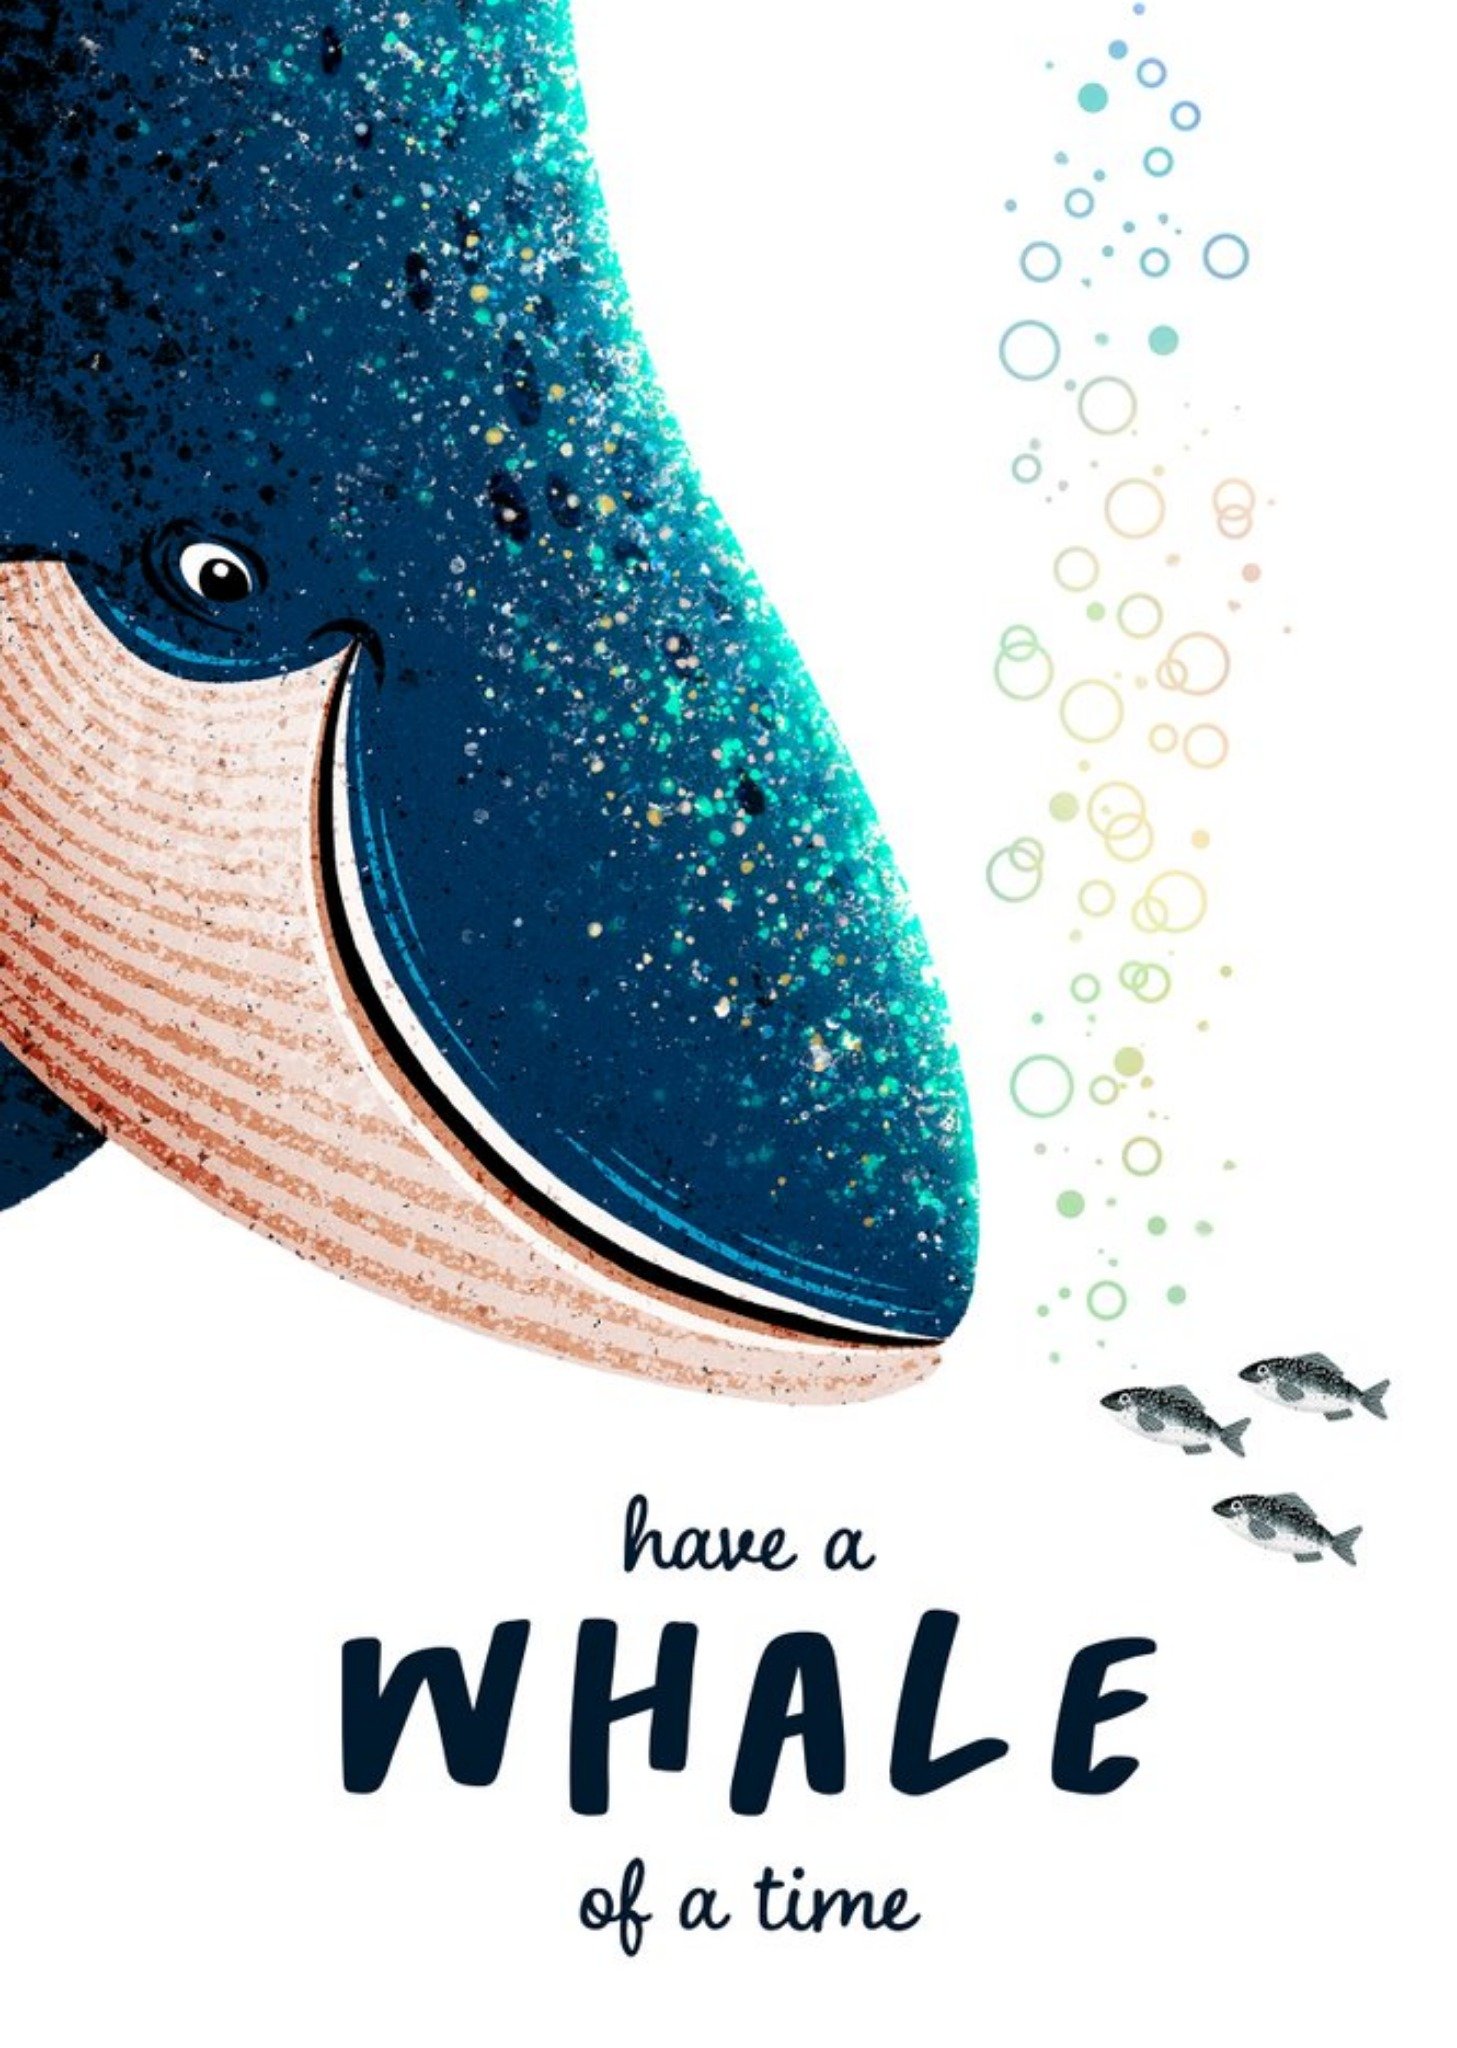 Moonpig Folio Illustration Of A Whale And Three Fishes. Have A Whale Of A Time Birthday Card, Large